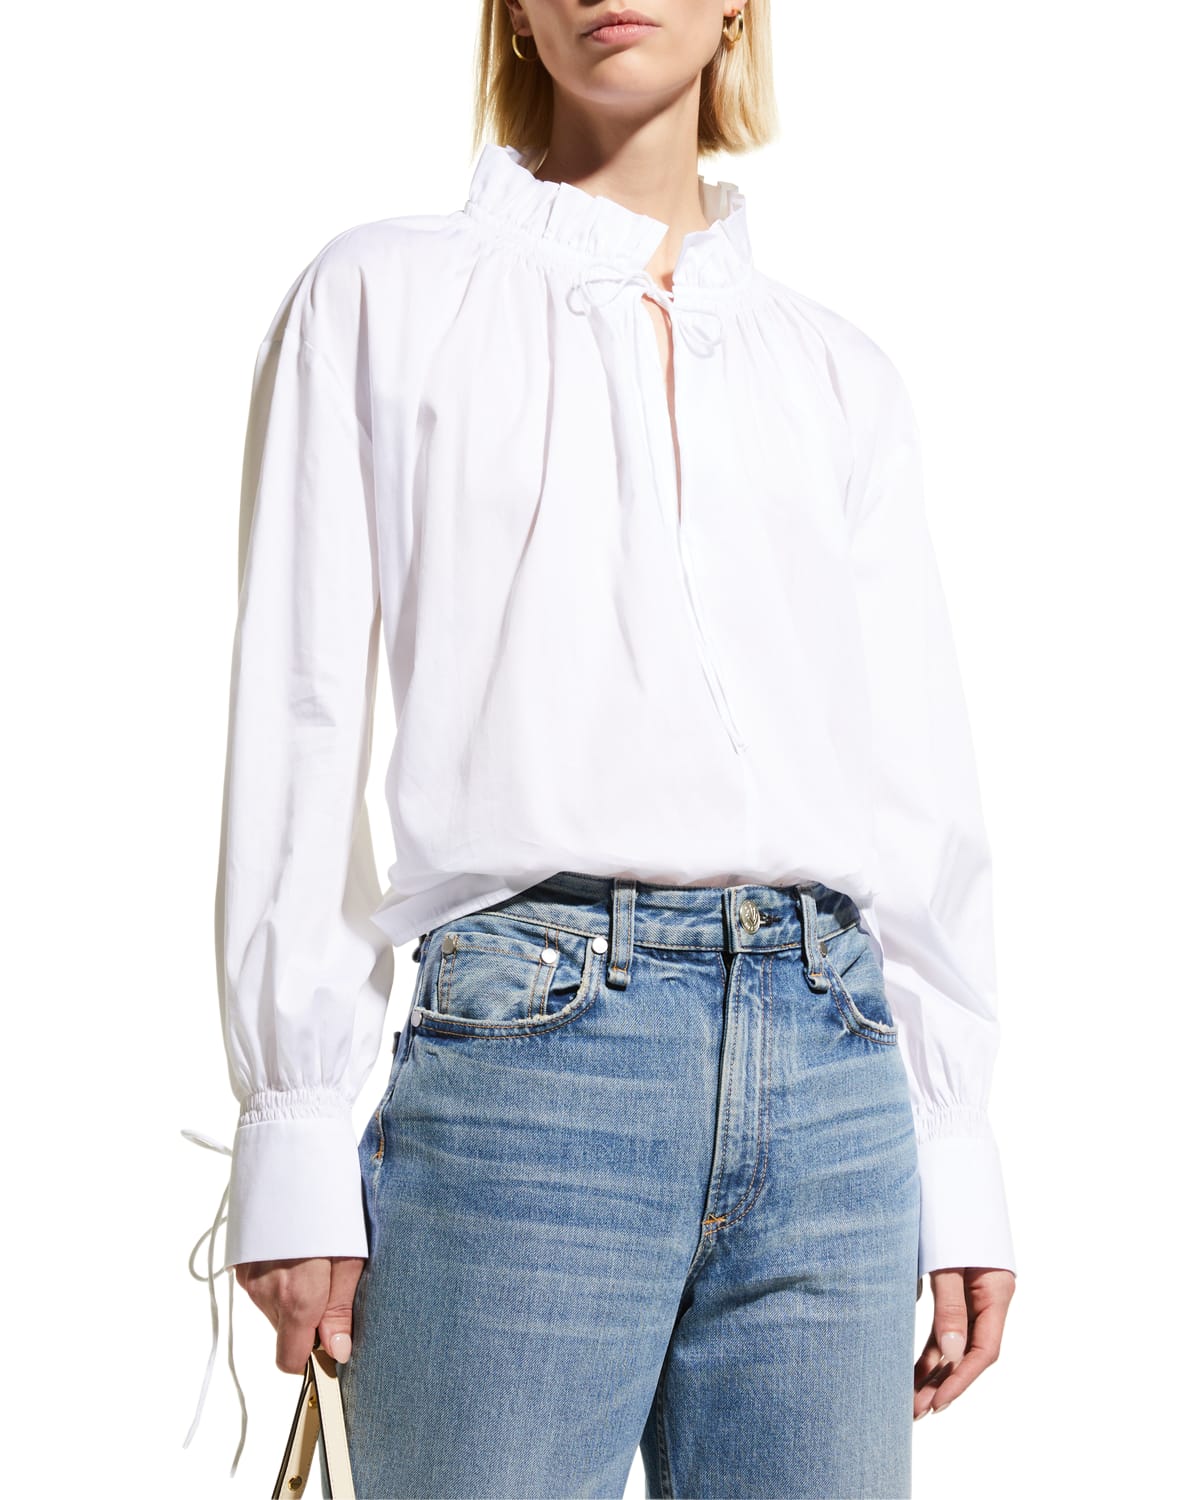 Harshman Audrey Ruched High-Neck Blouse